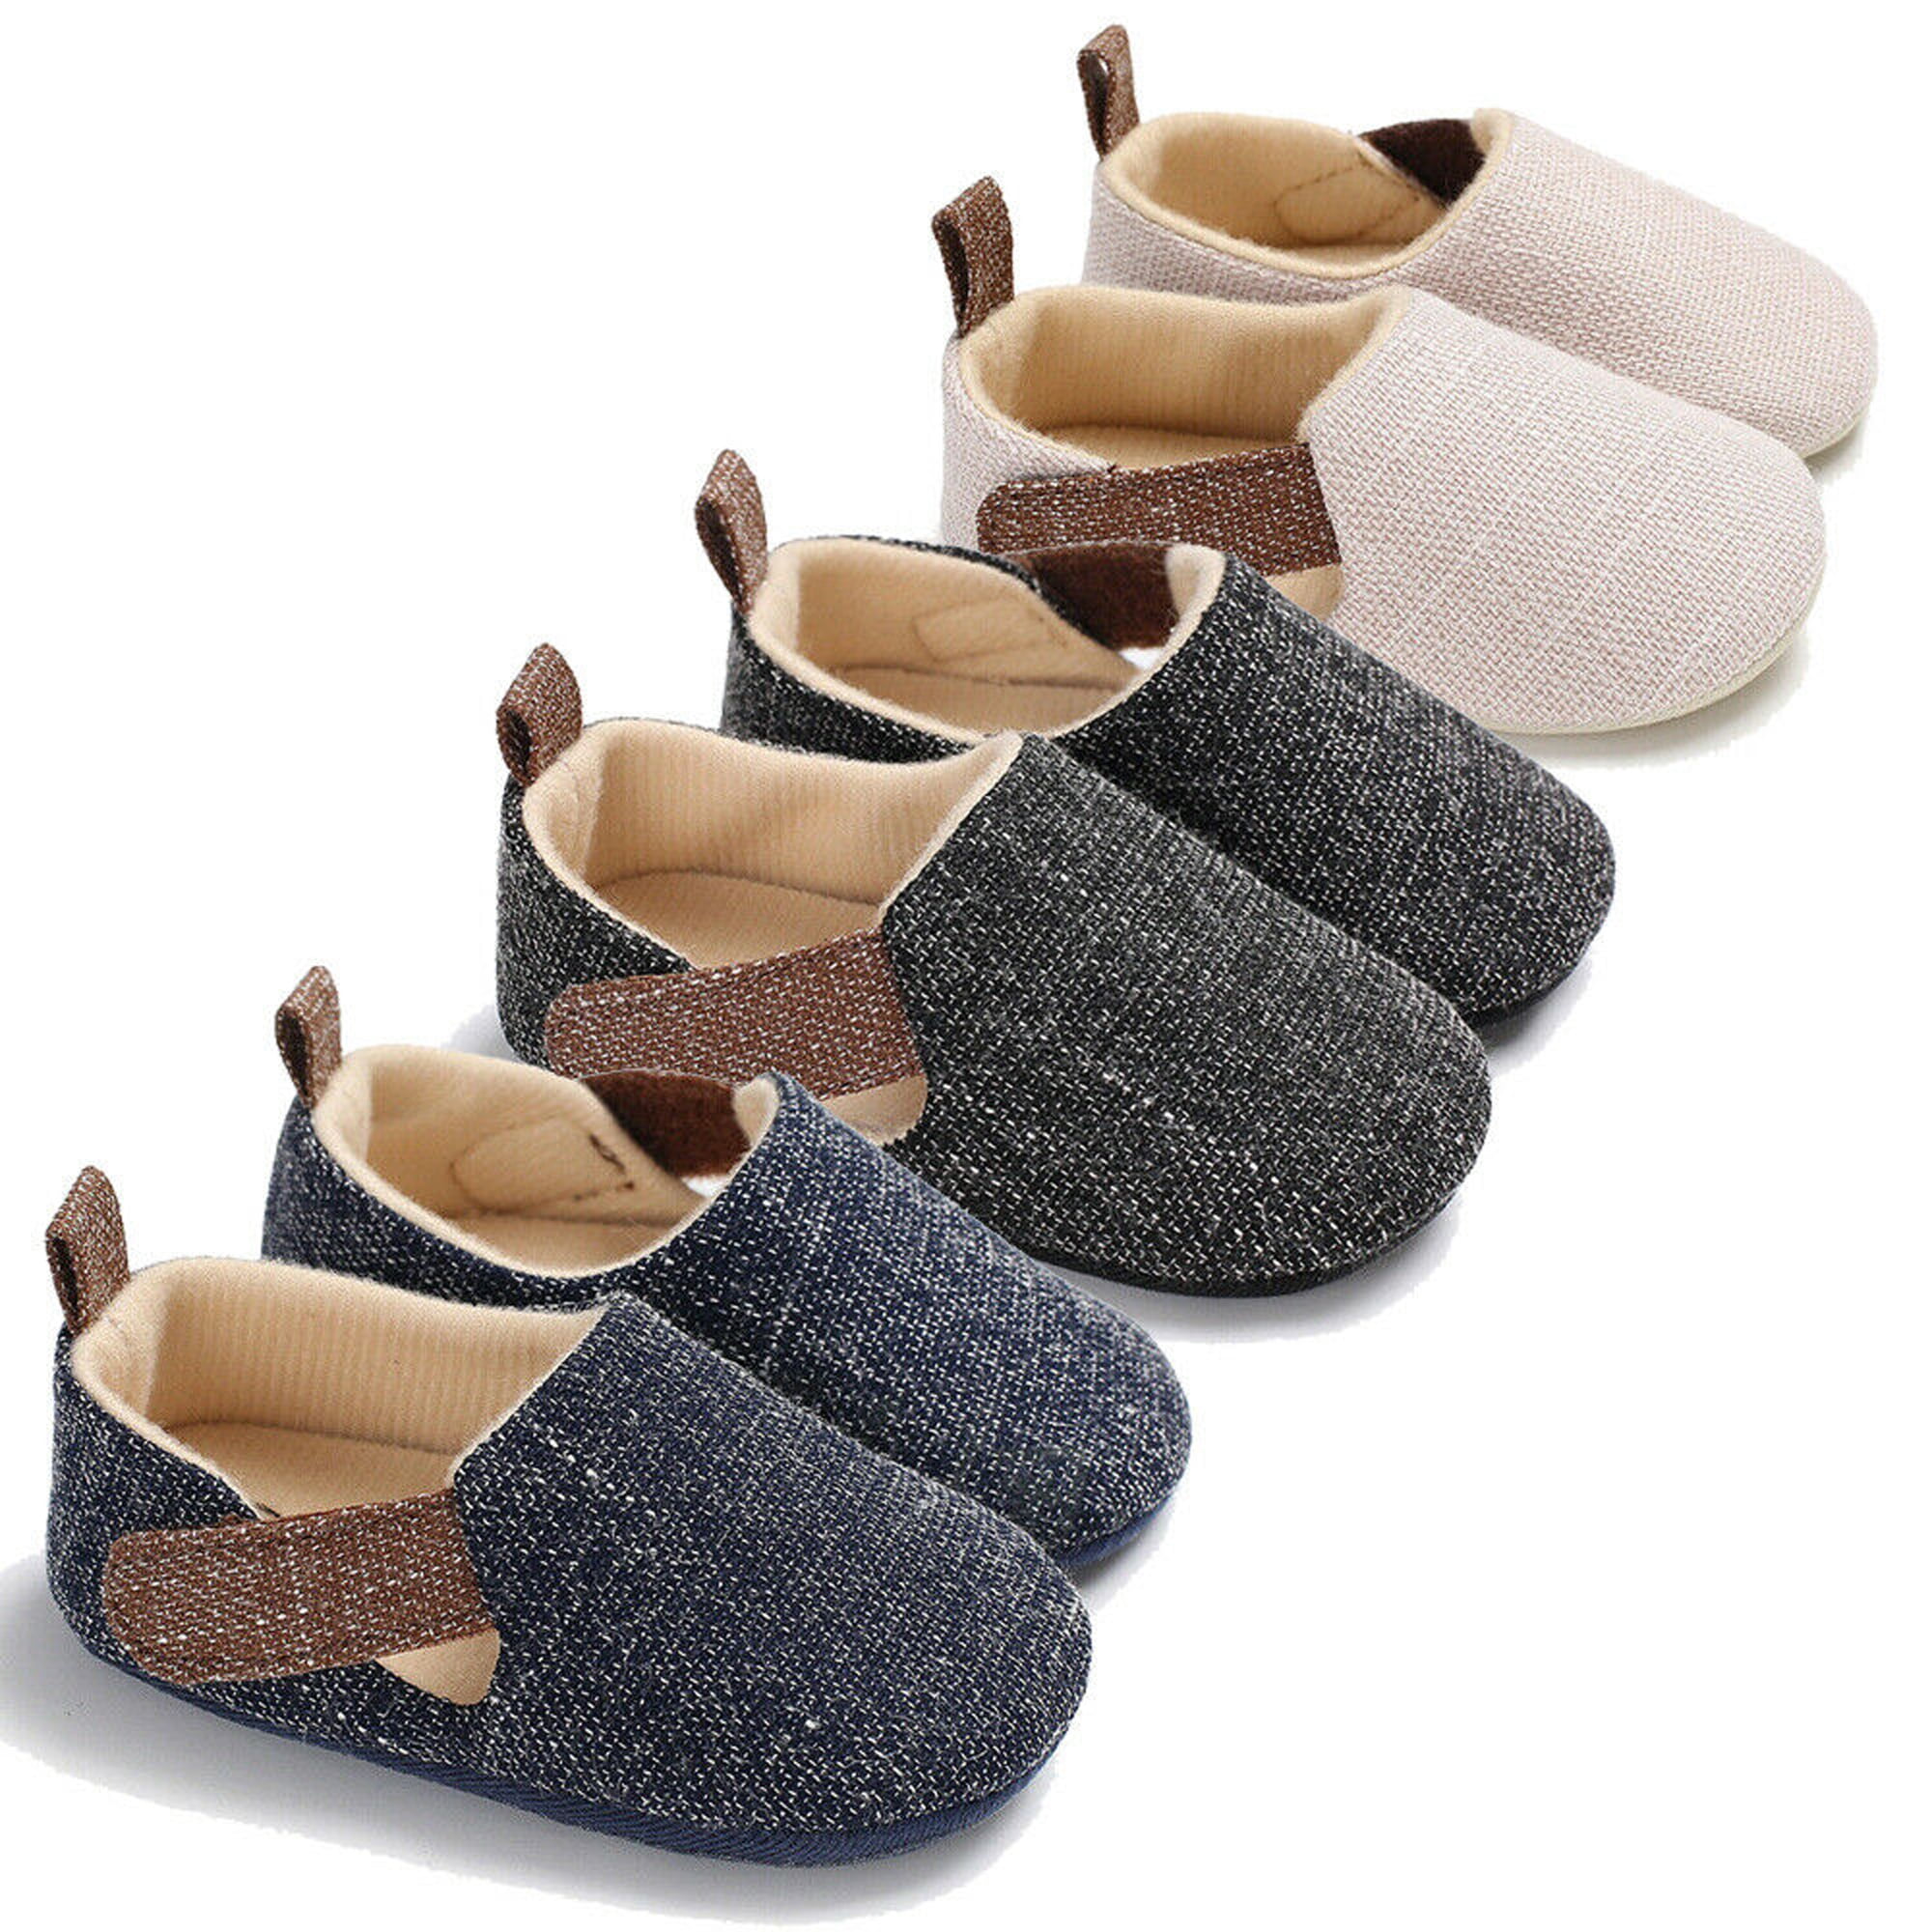 Confortable Baby Shoes Soft Sole Cute Crib Toddler Shoes for 0-18month baby 